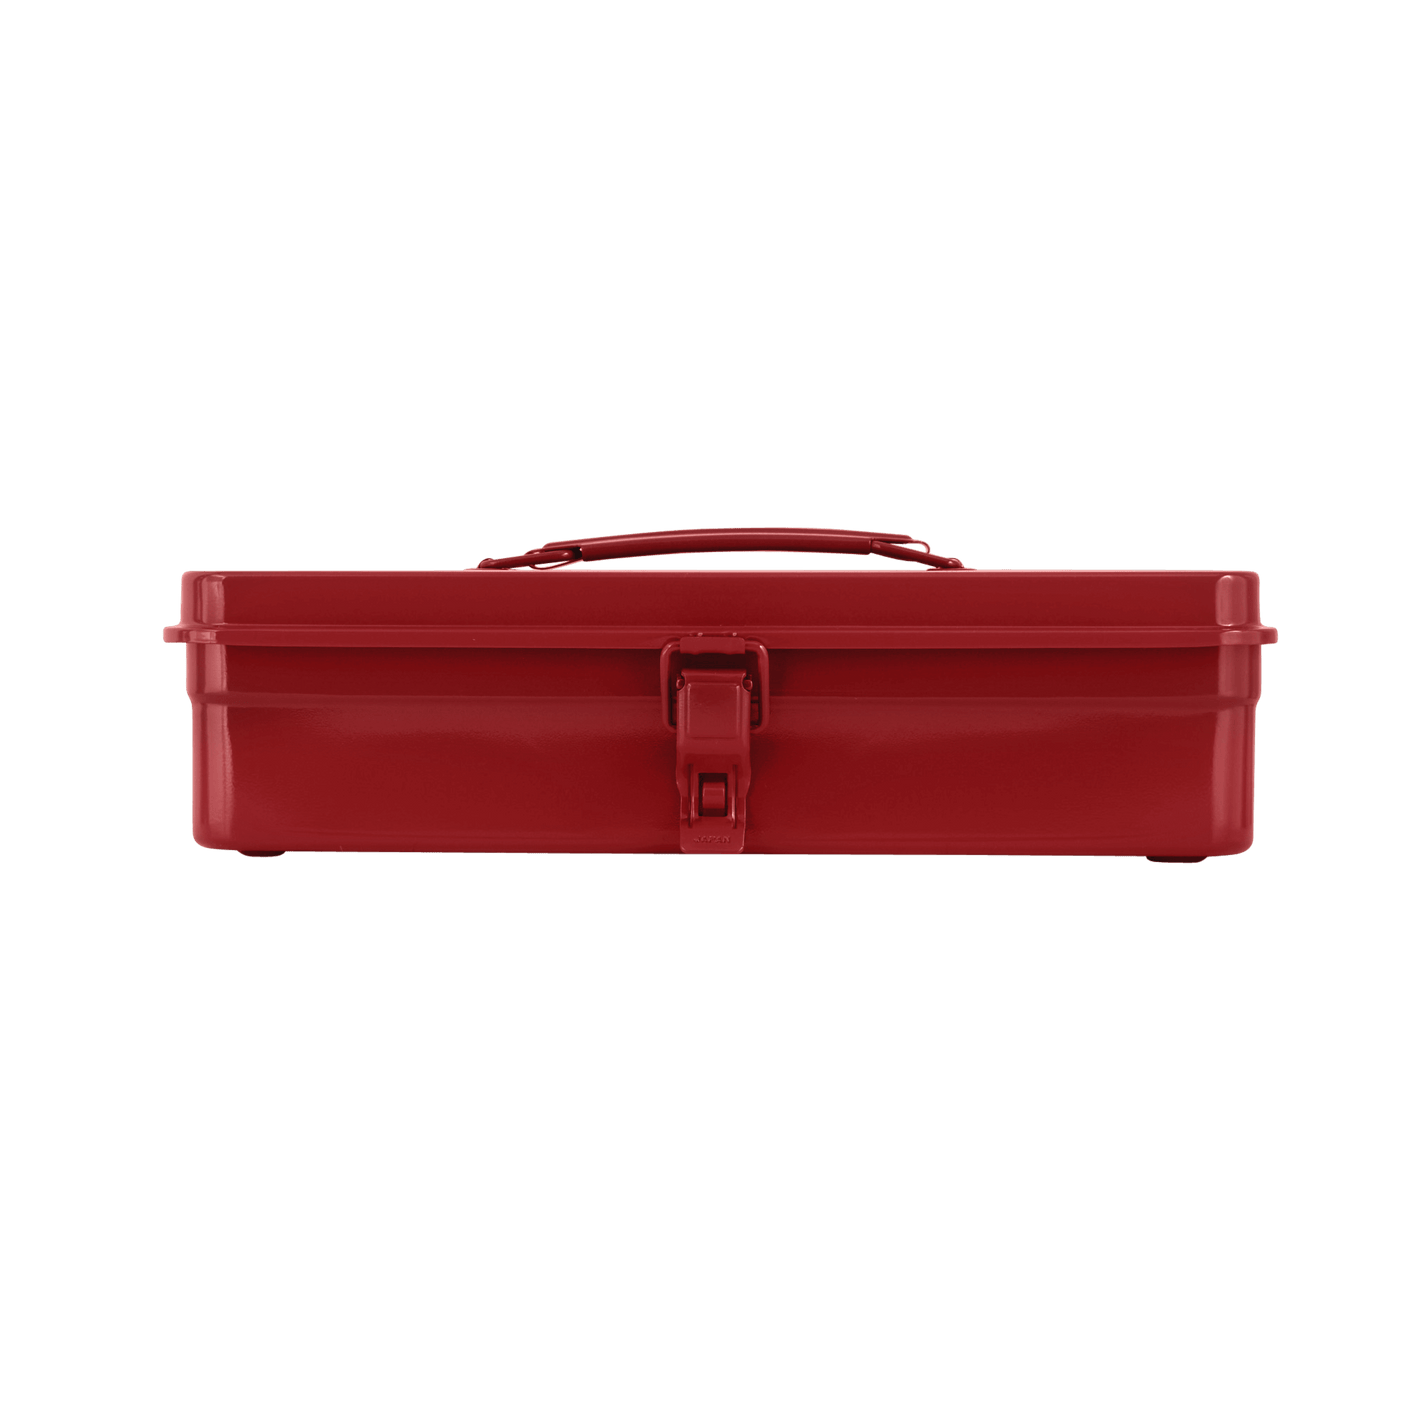 TOYO Trunk Shape Toolbox T-320 R (Red) - Tool Bags Boxes and Rolls - Japanese Tools Australia